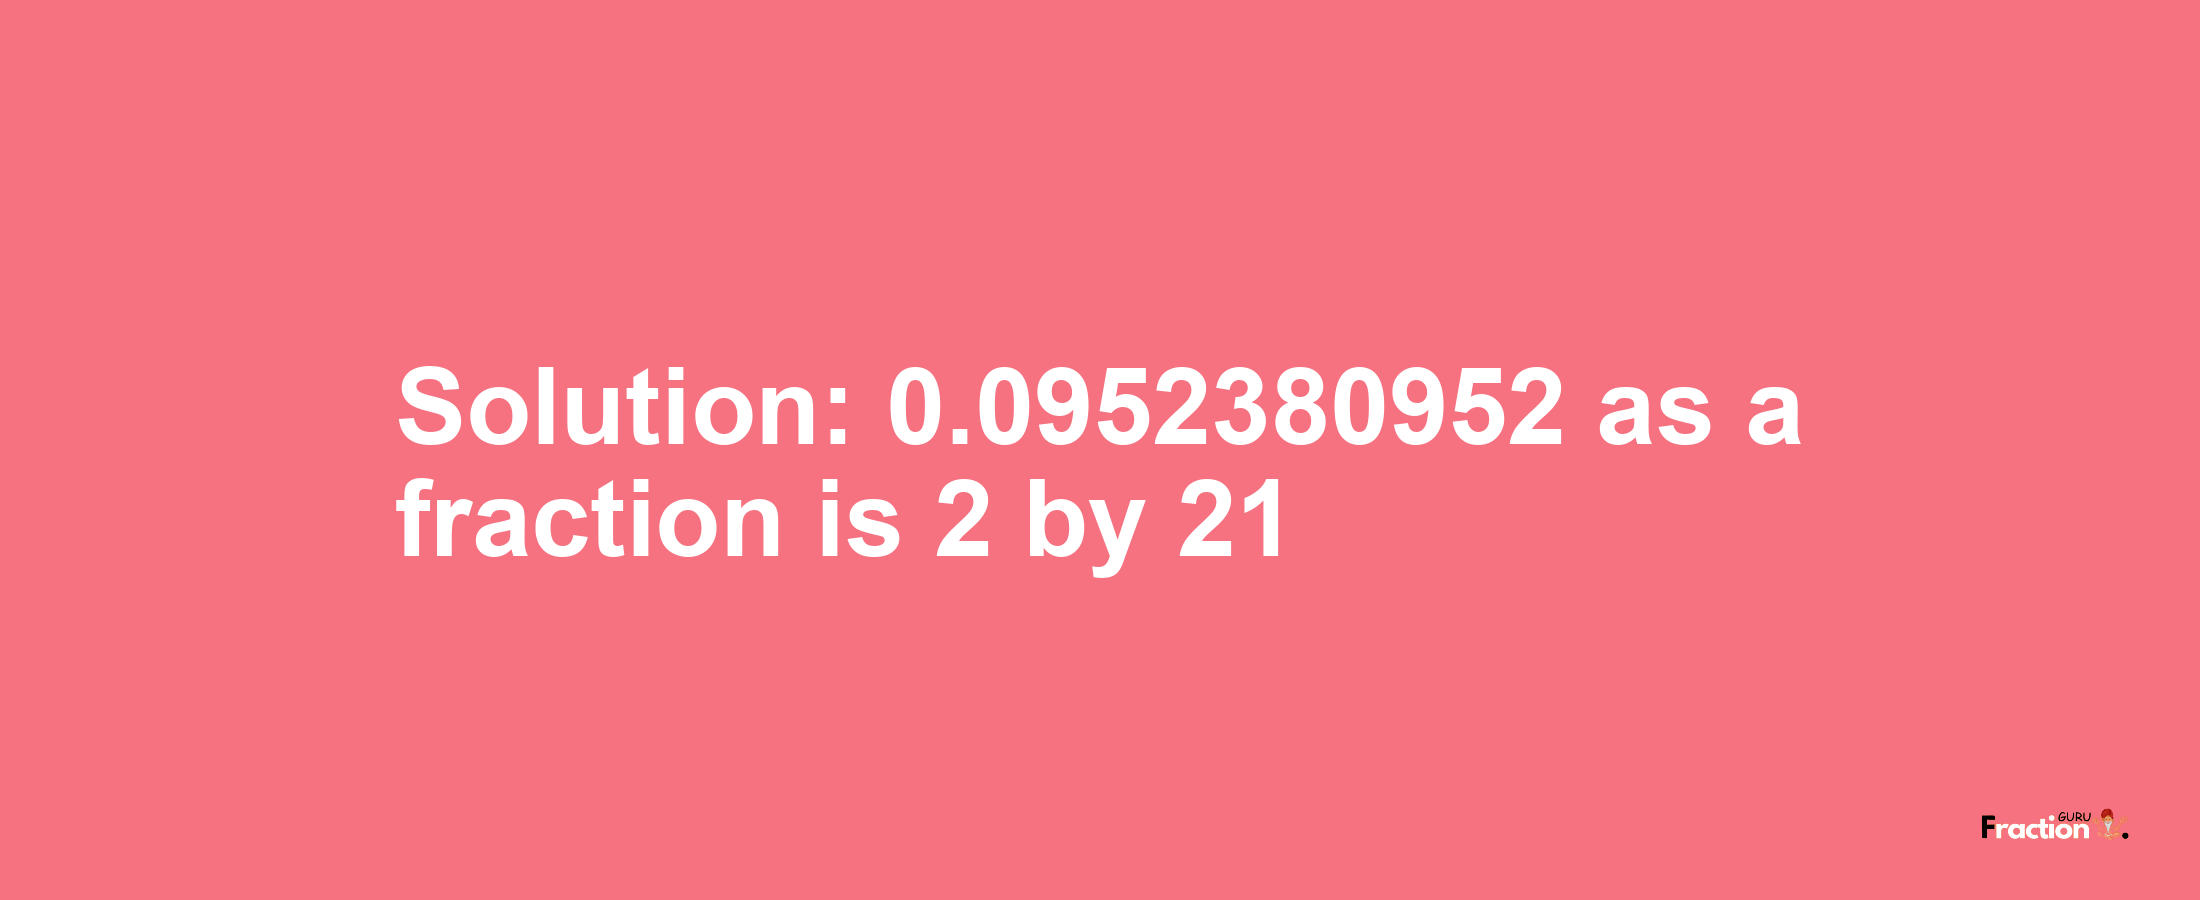 Solution:0.0952380952 as a fraction is 2/21